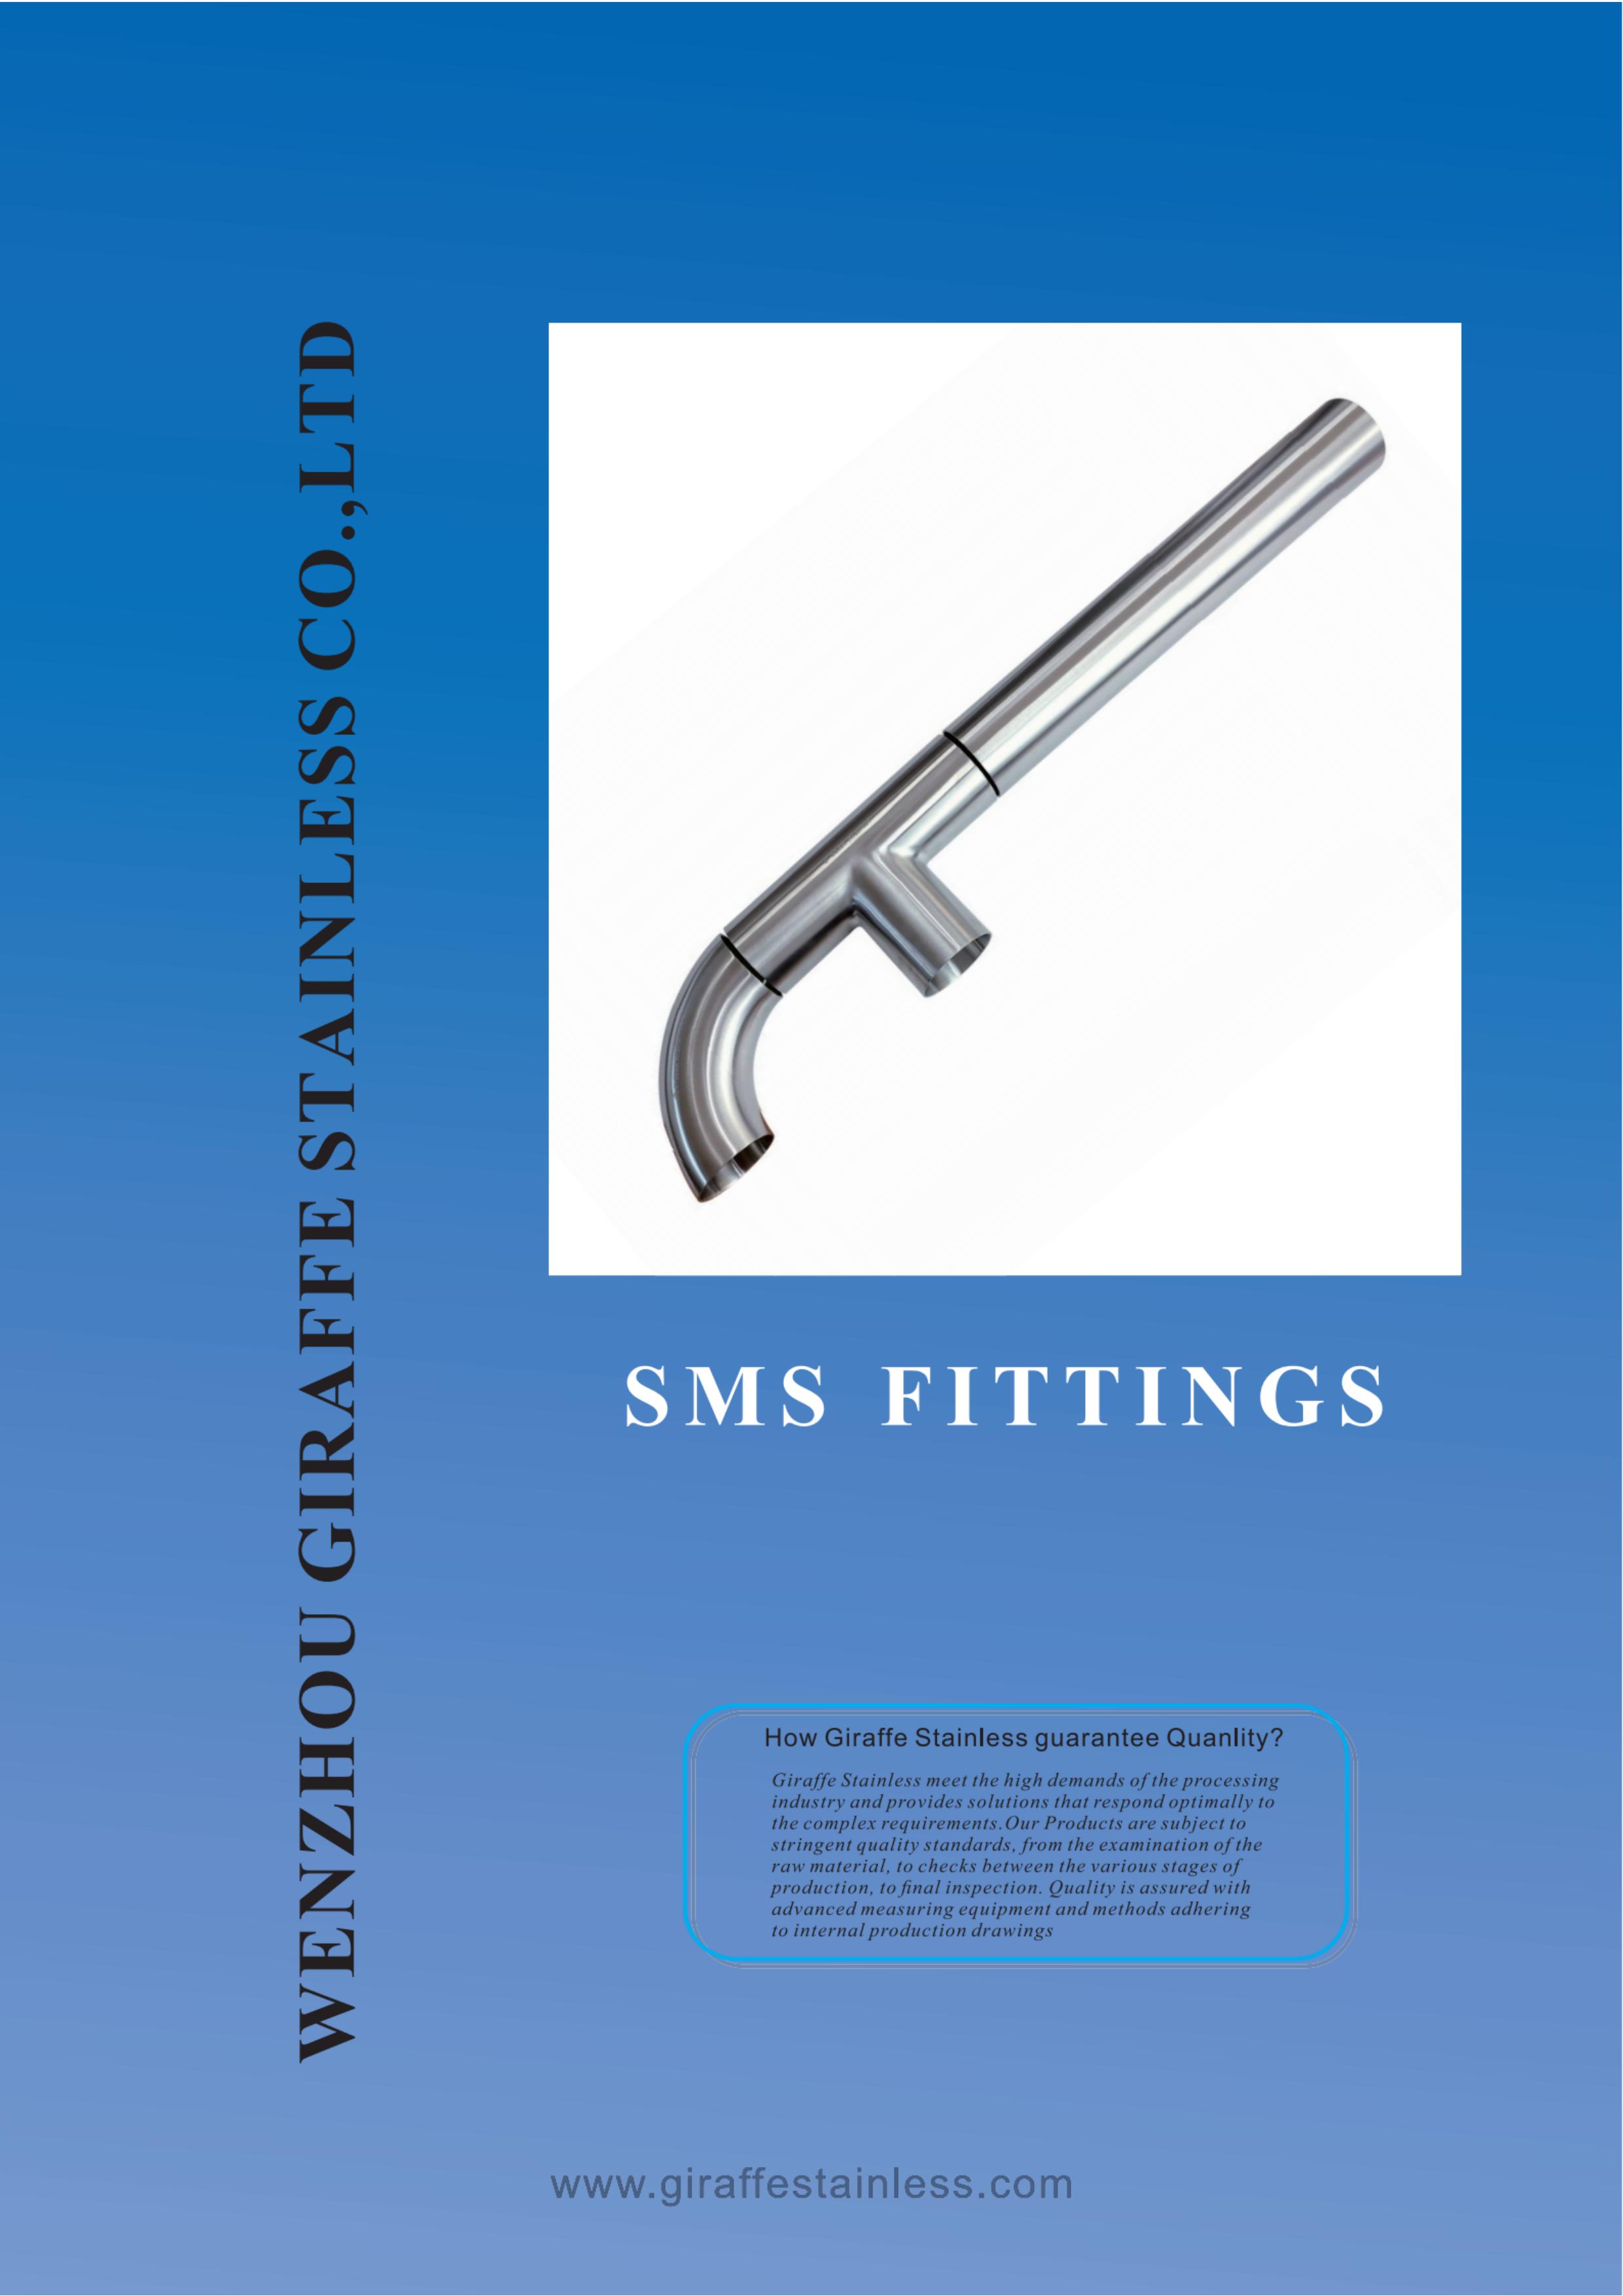 SMS FITTINGS